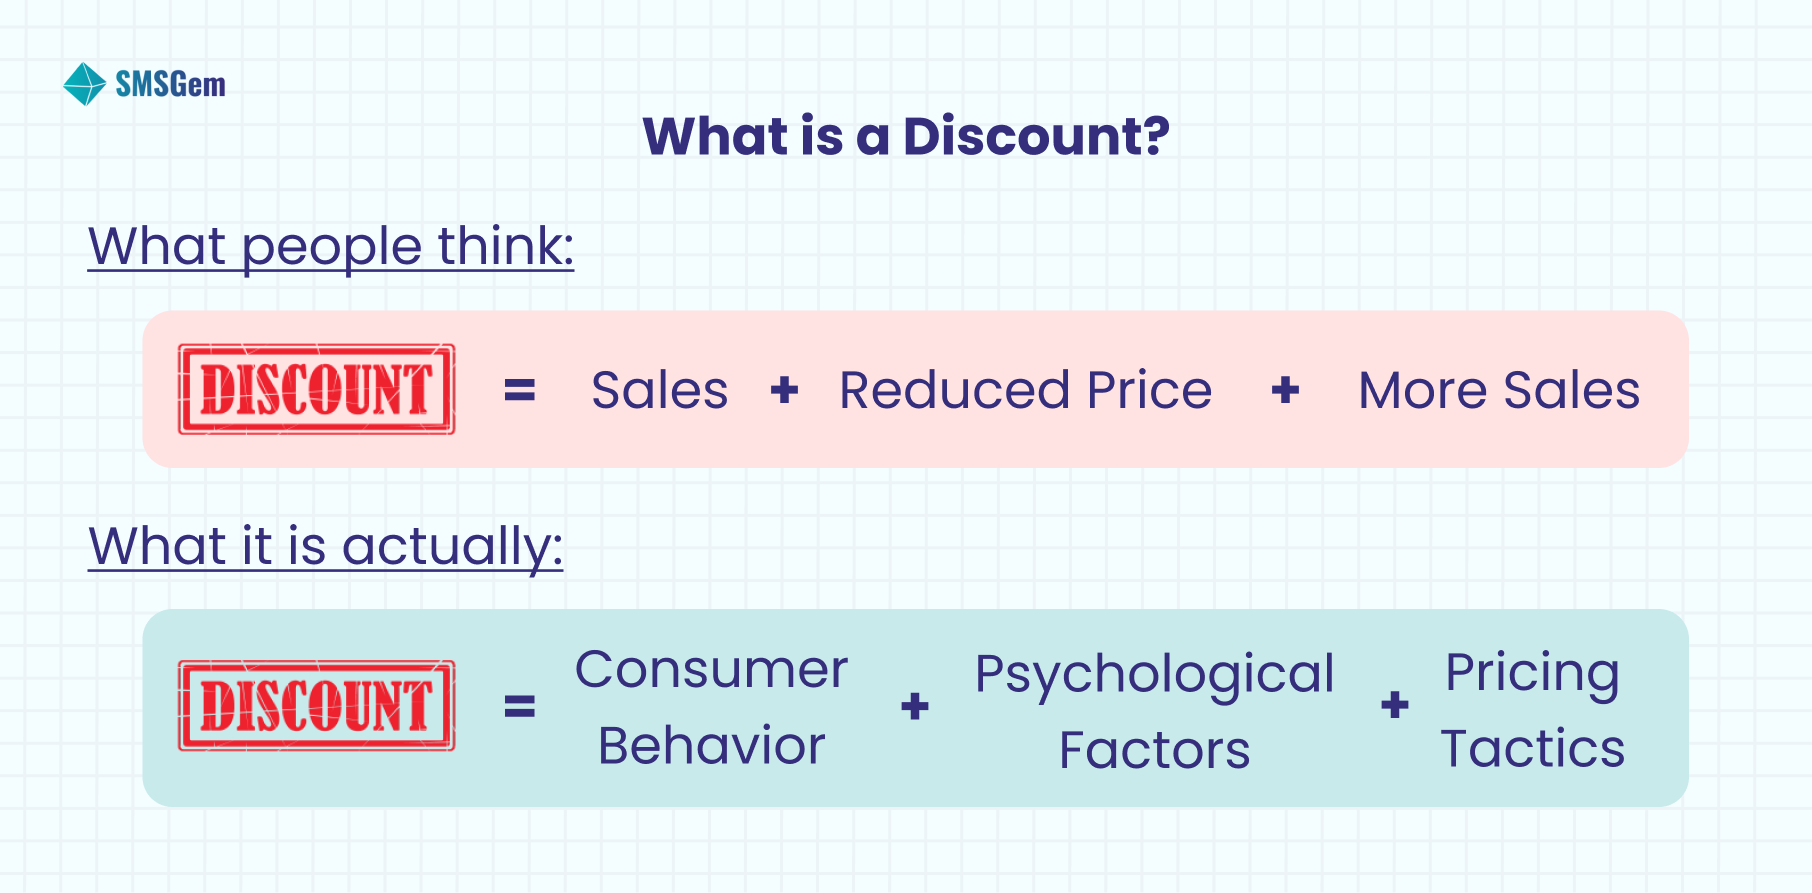 What is a Discount?